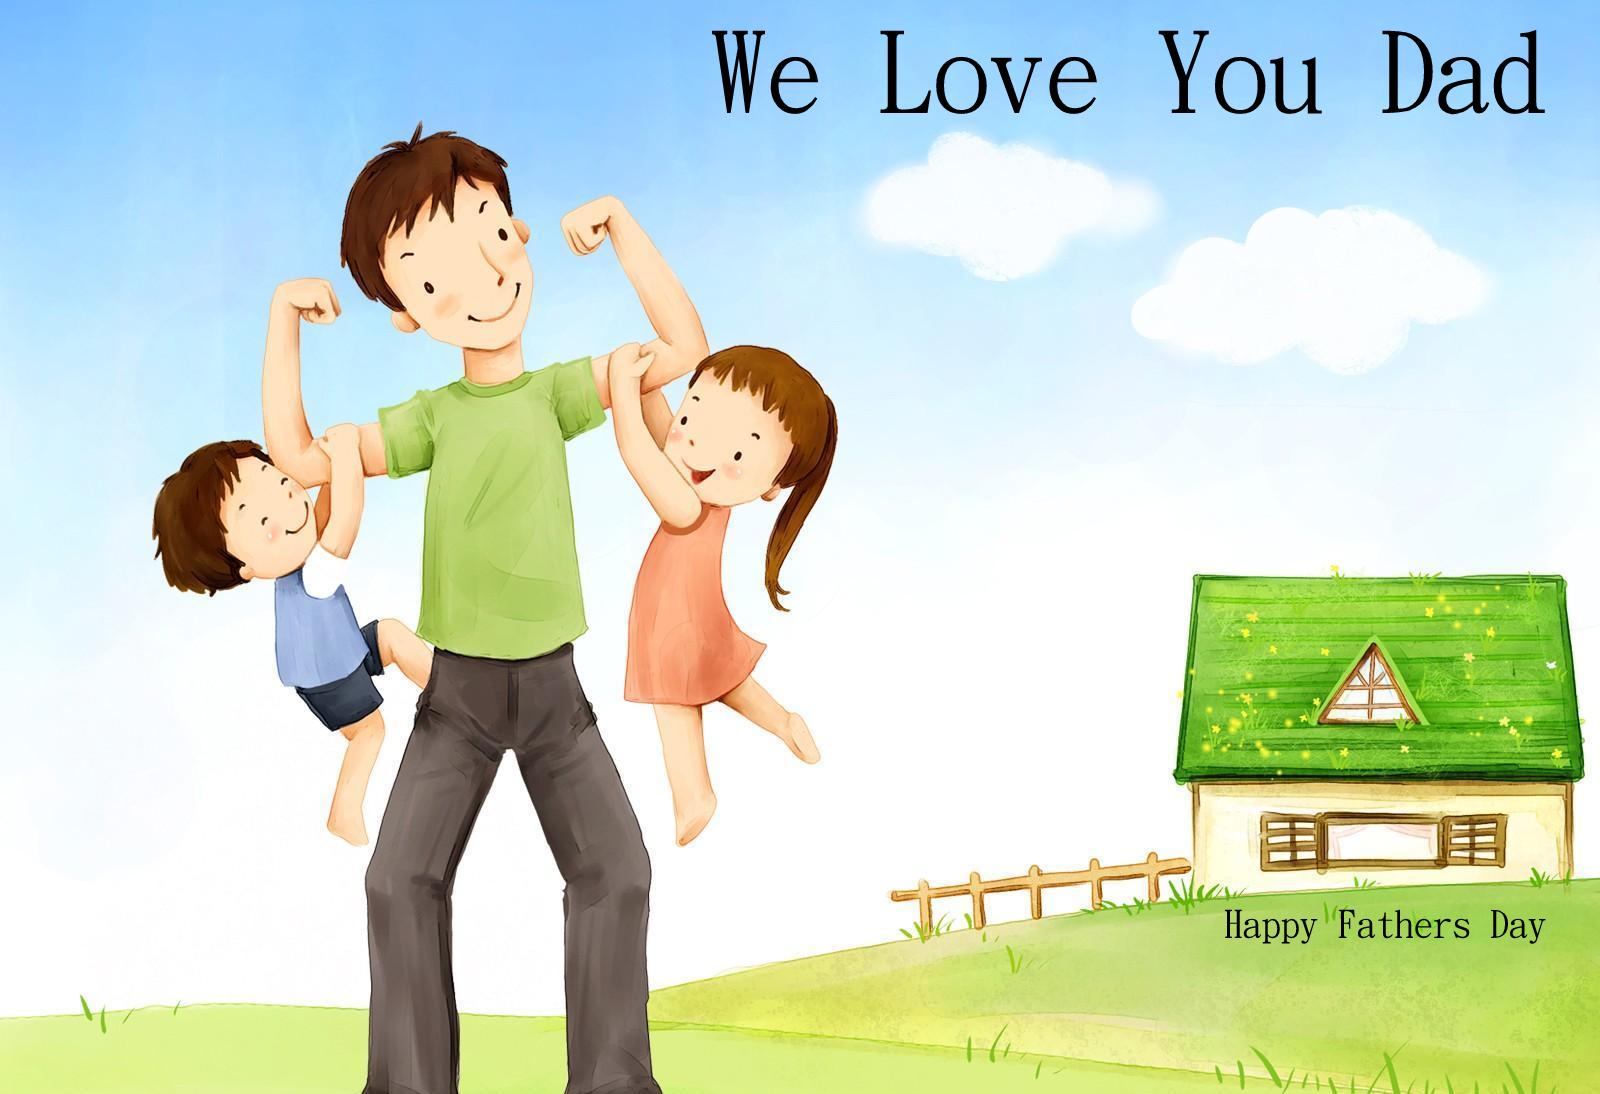 We Love You Dad Happy Fathers Day, Download Fastival greetings, HD